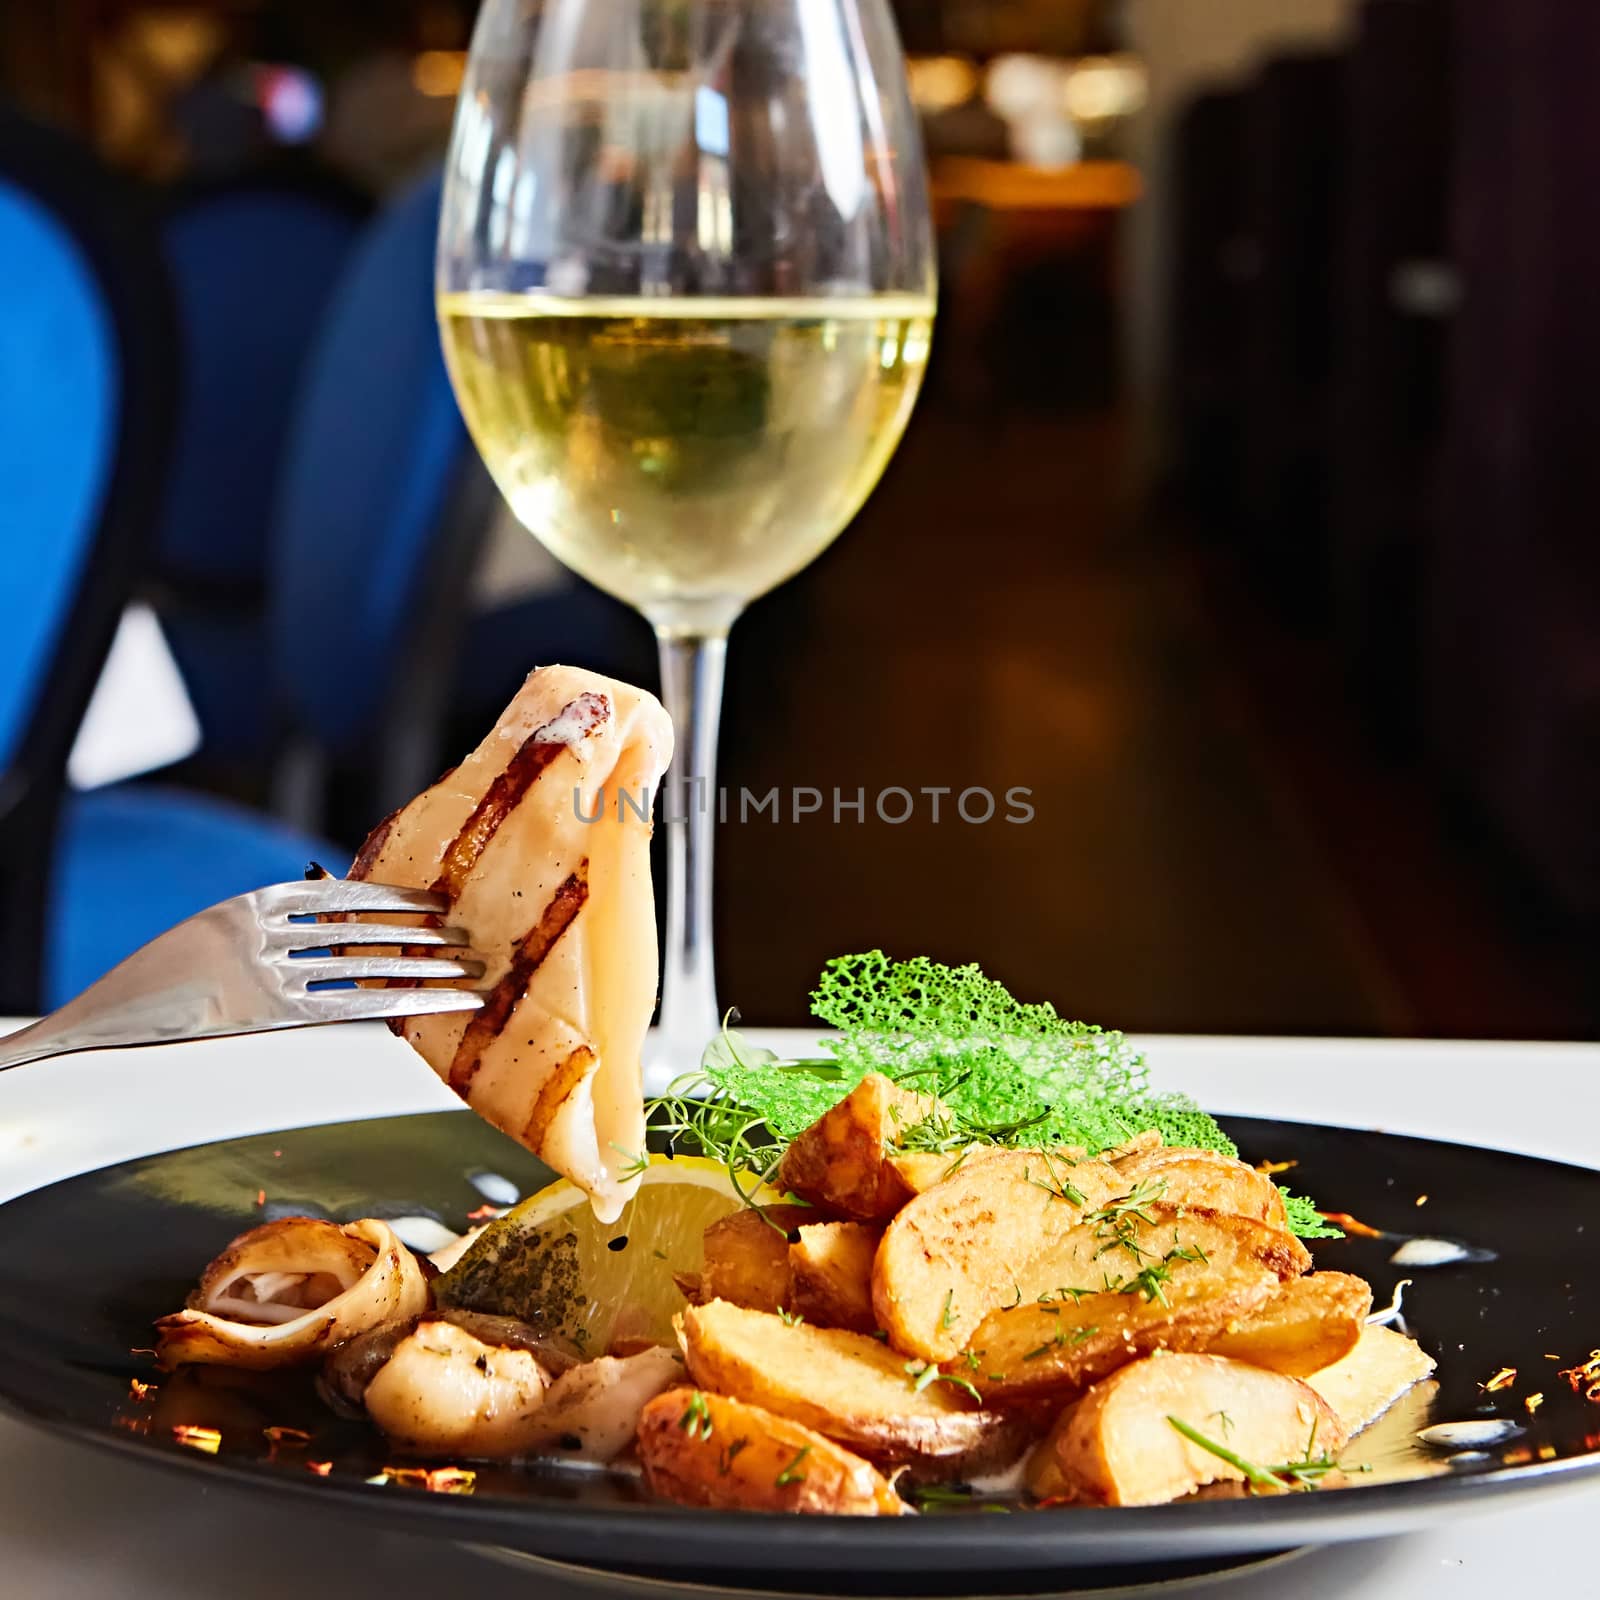 Grilled squid with salad. Shallow dof